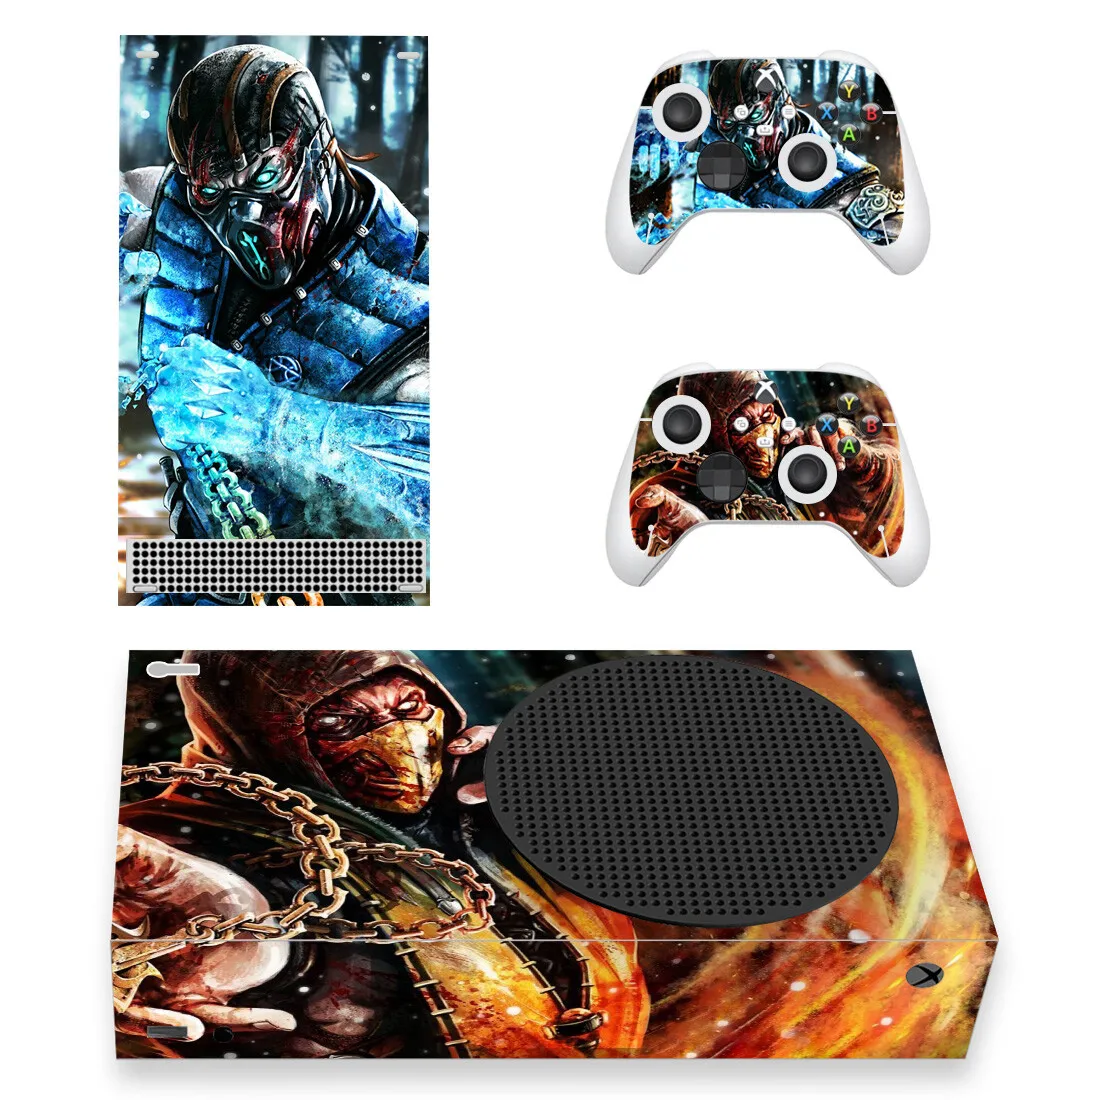 

Mortal Kombat Skin Sticker Decal Cover for Xbox Series S Console and 2 Controllers Xbox Series Slim Skin Sticker Vinyl